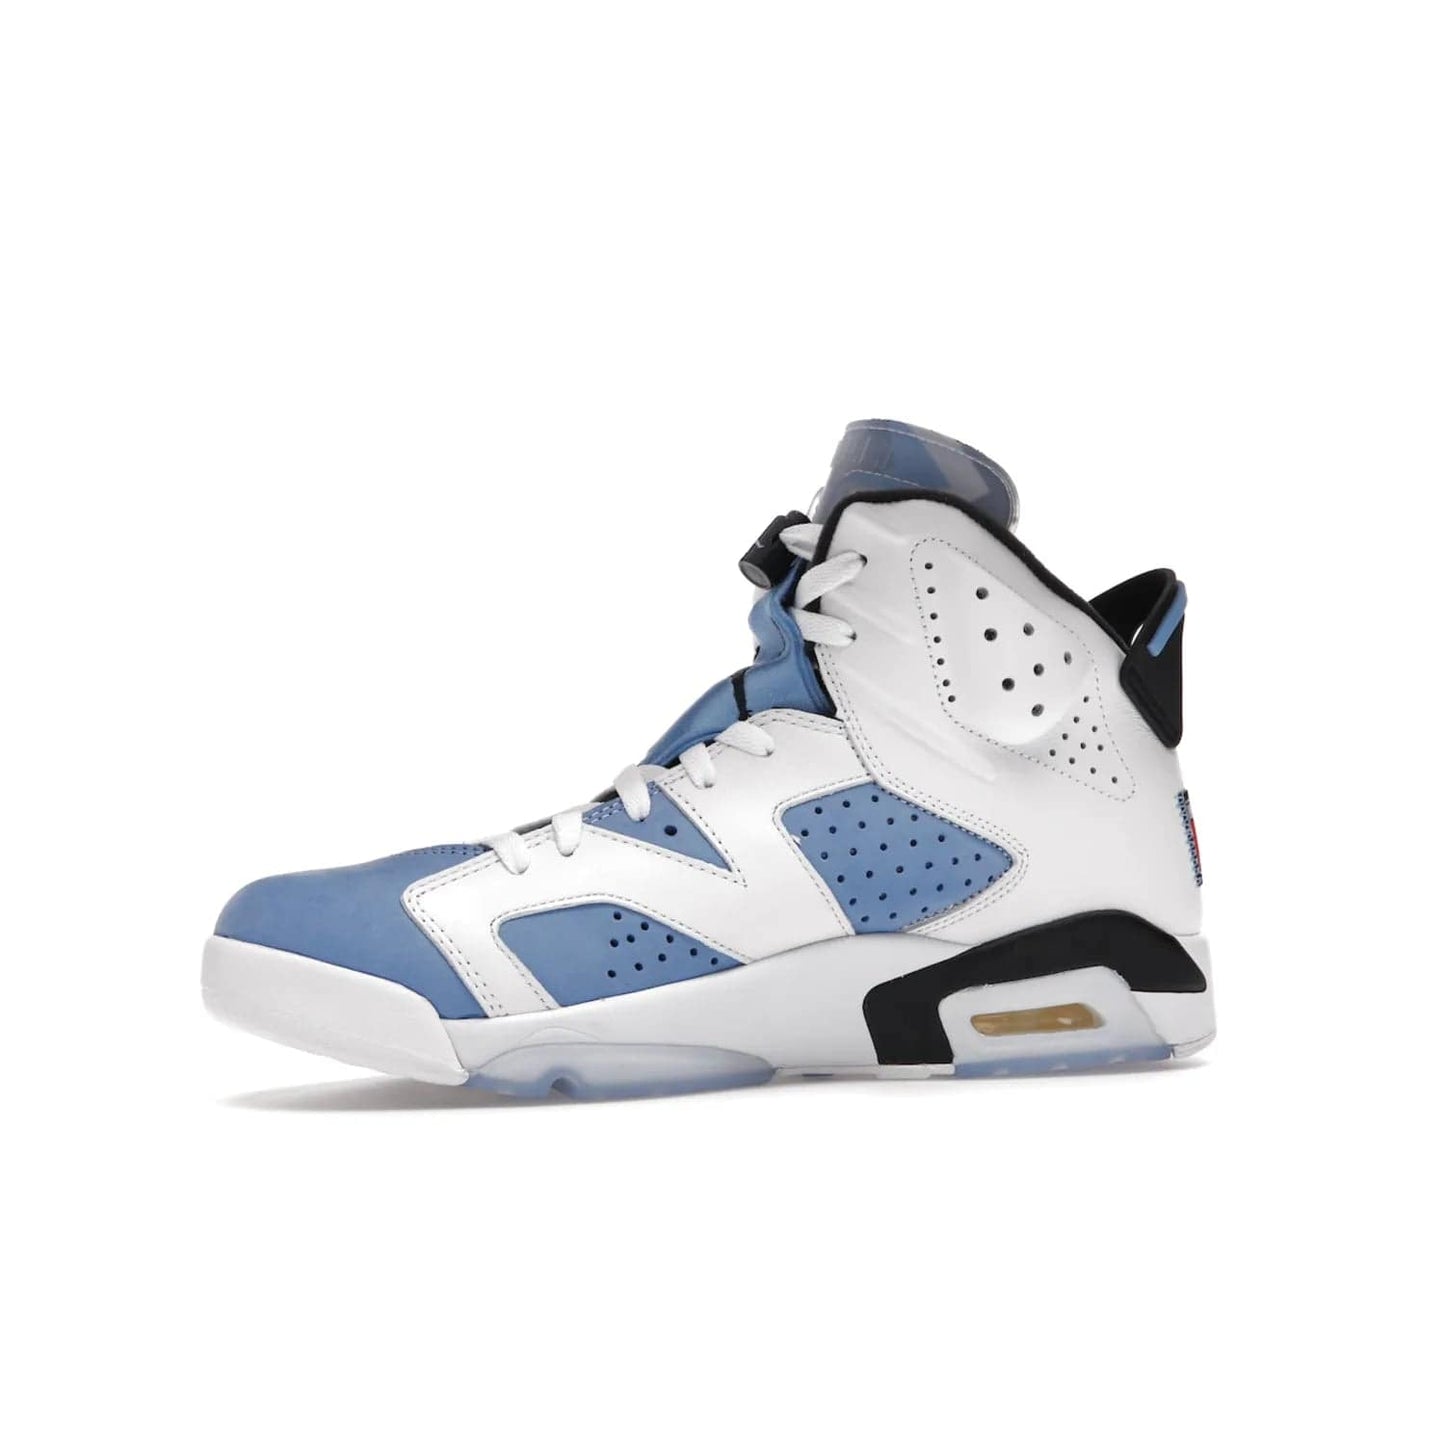 Jordan 6 Retro UNC White - Image 17 - Only at www.BallersClubKickz.com - Air Jordan 6 Retro UNC White with classic UNC colors brings nostalgia and style to a legendary silhouette. Celebrate MJ's alma mater with navy blue accents, icy semi-translucent sole and Jordan Team patch. Out March 2022 for the Sneaker Enthusiast.